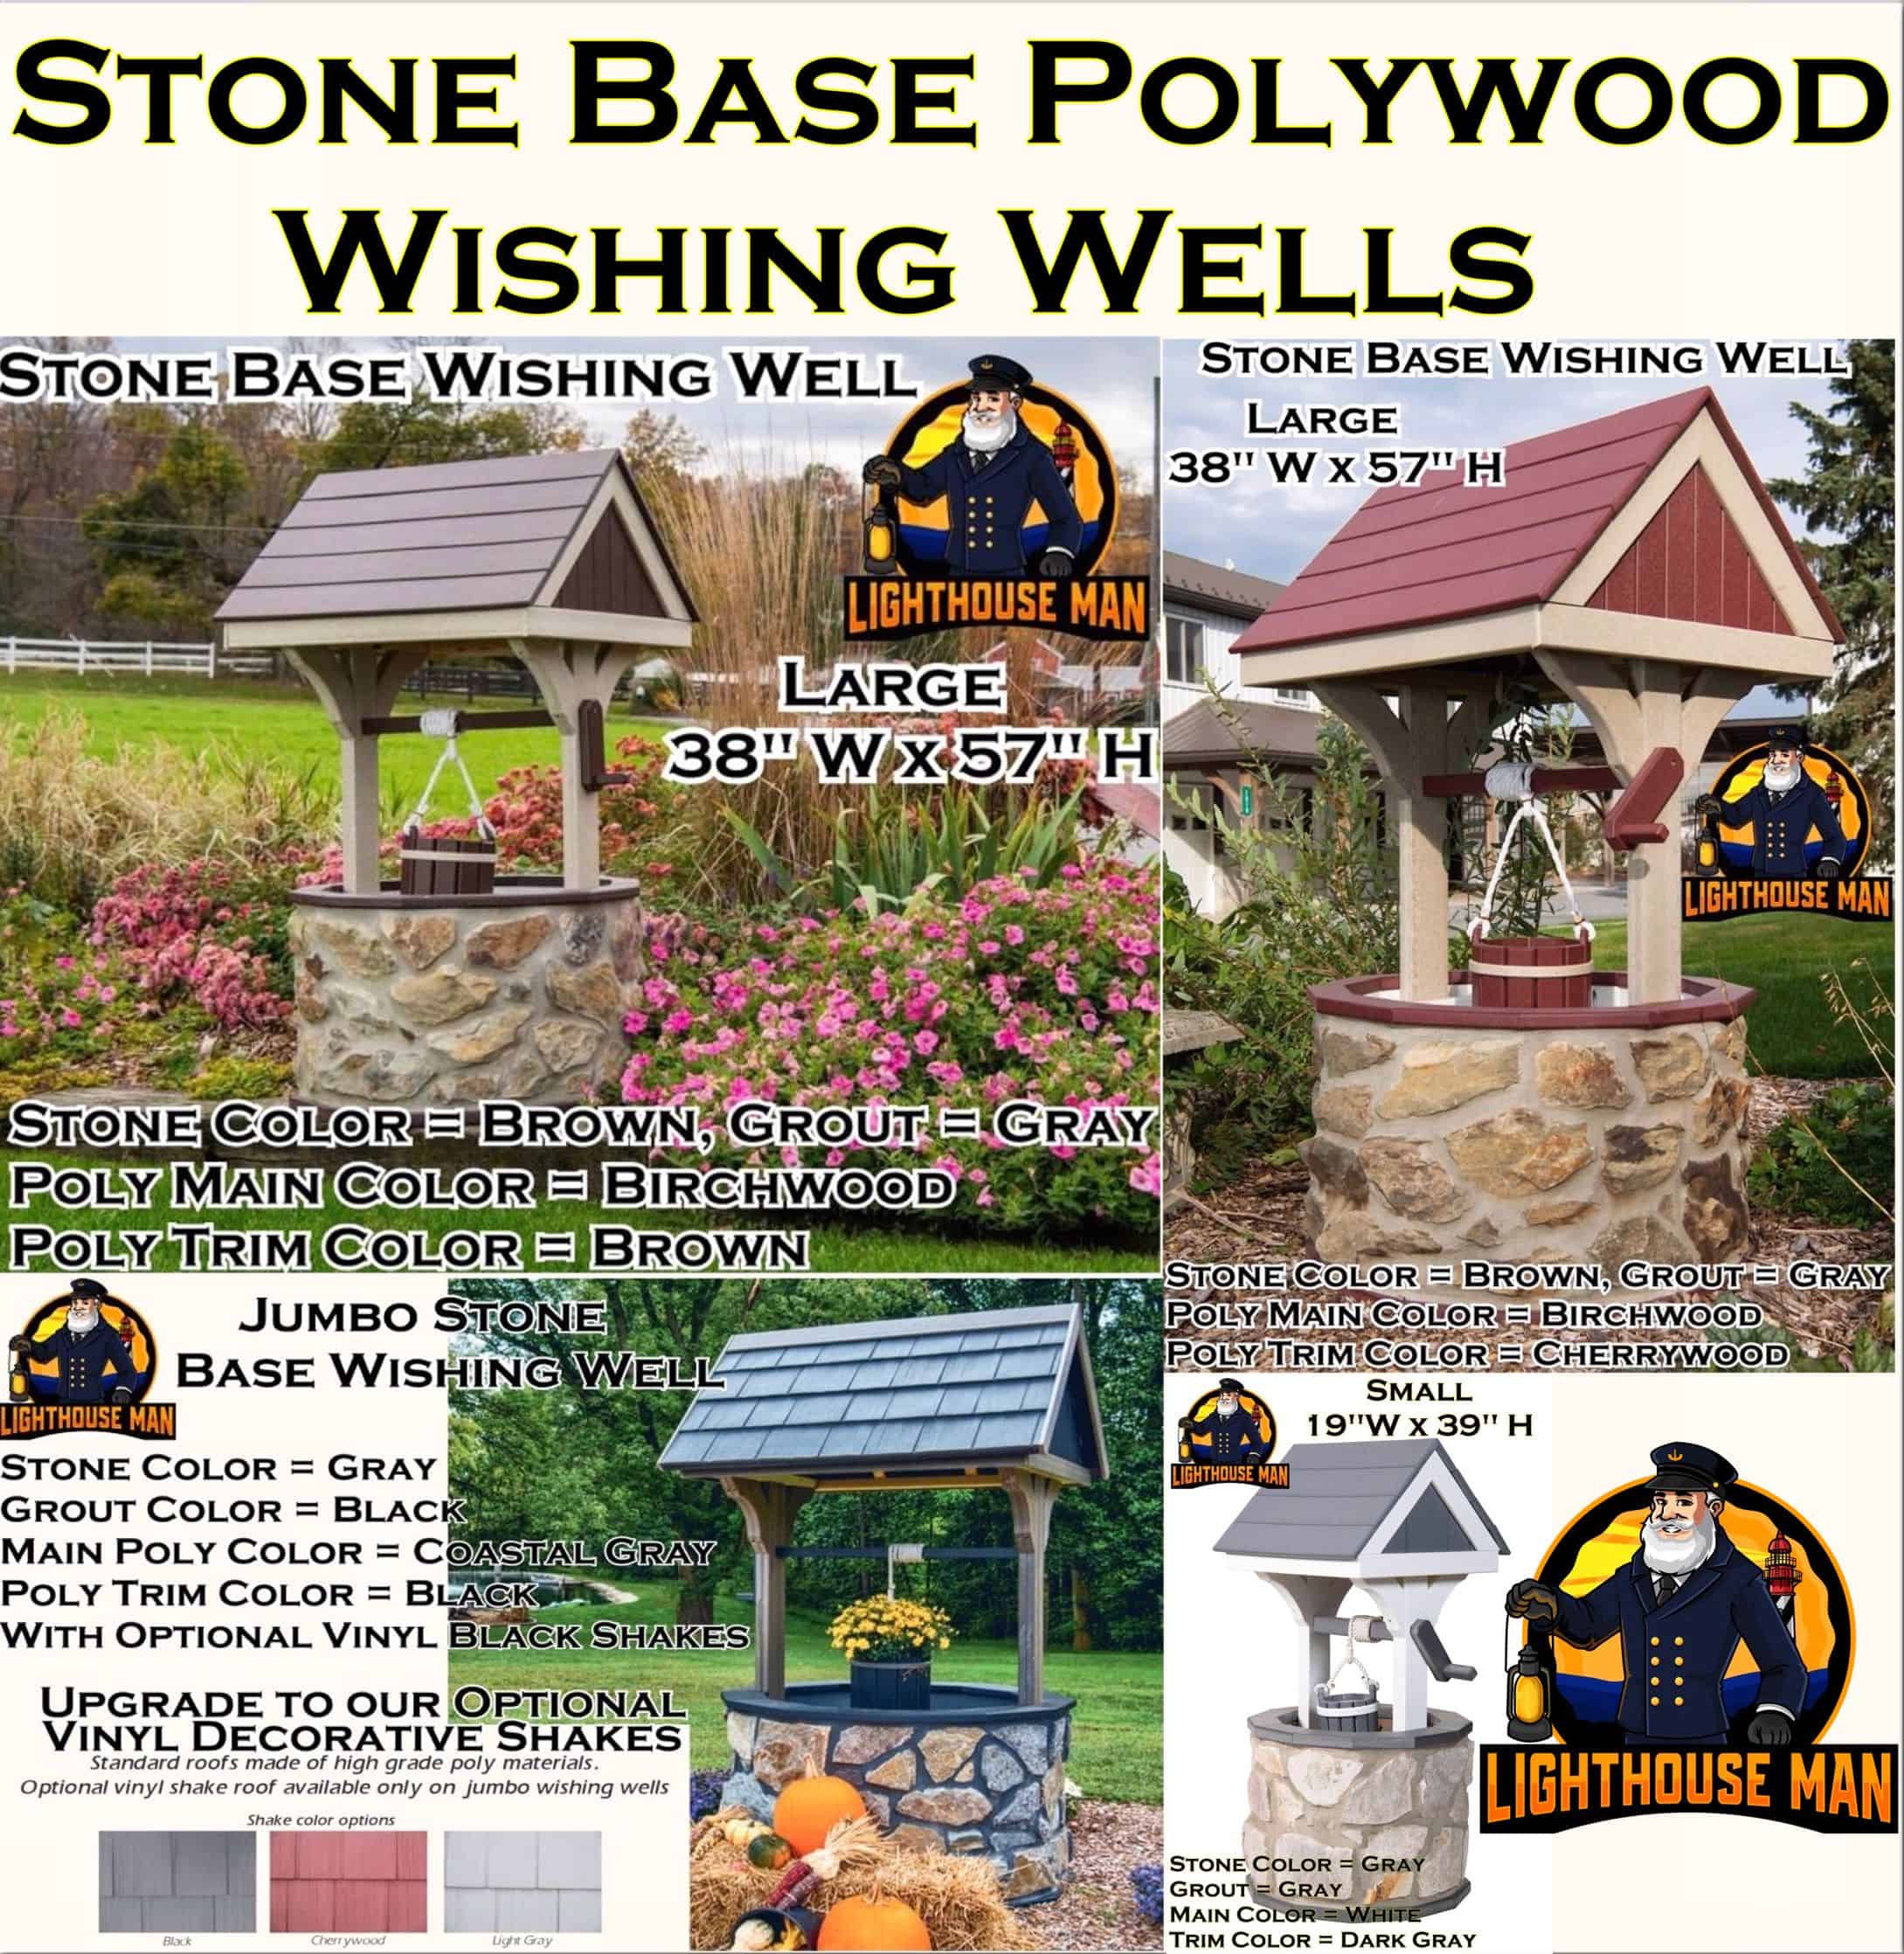 Stone Base Wishing Well Product Picture